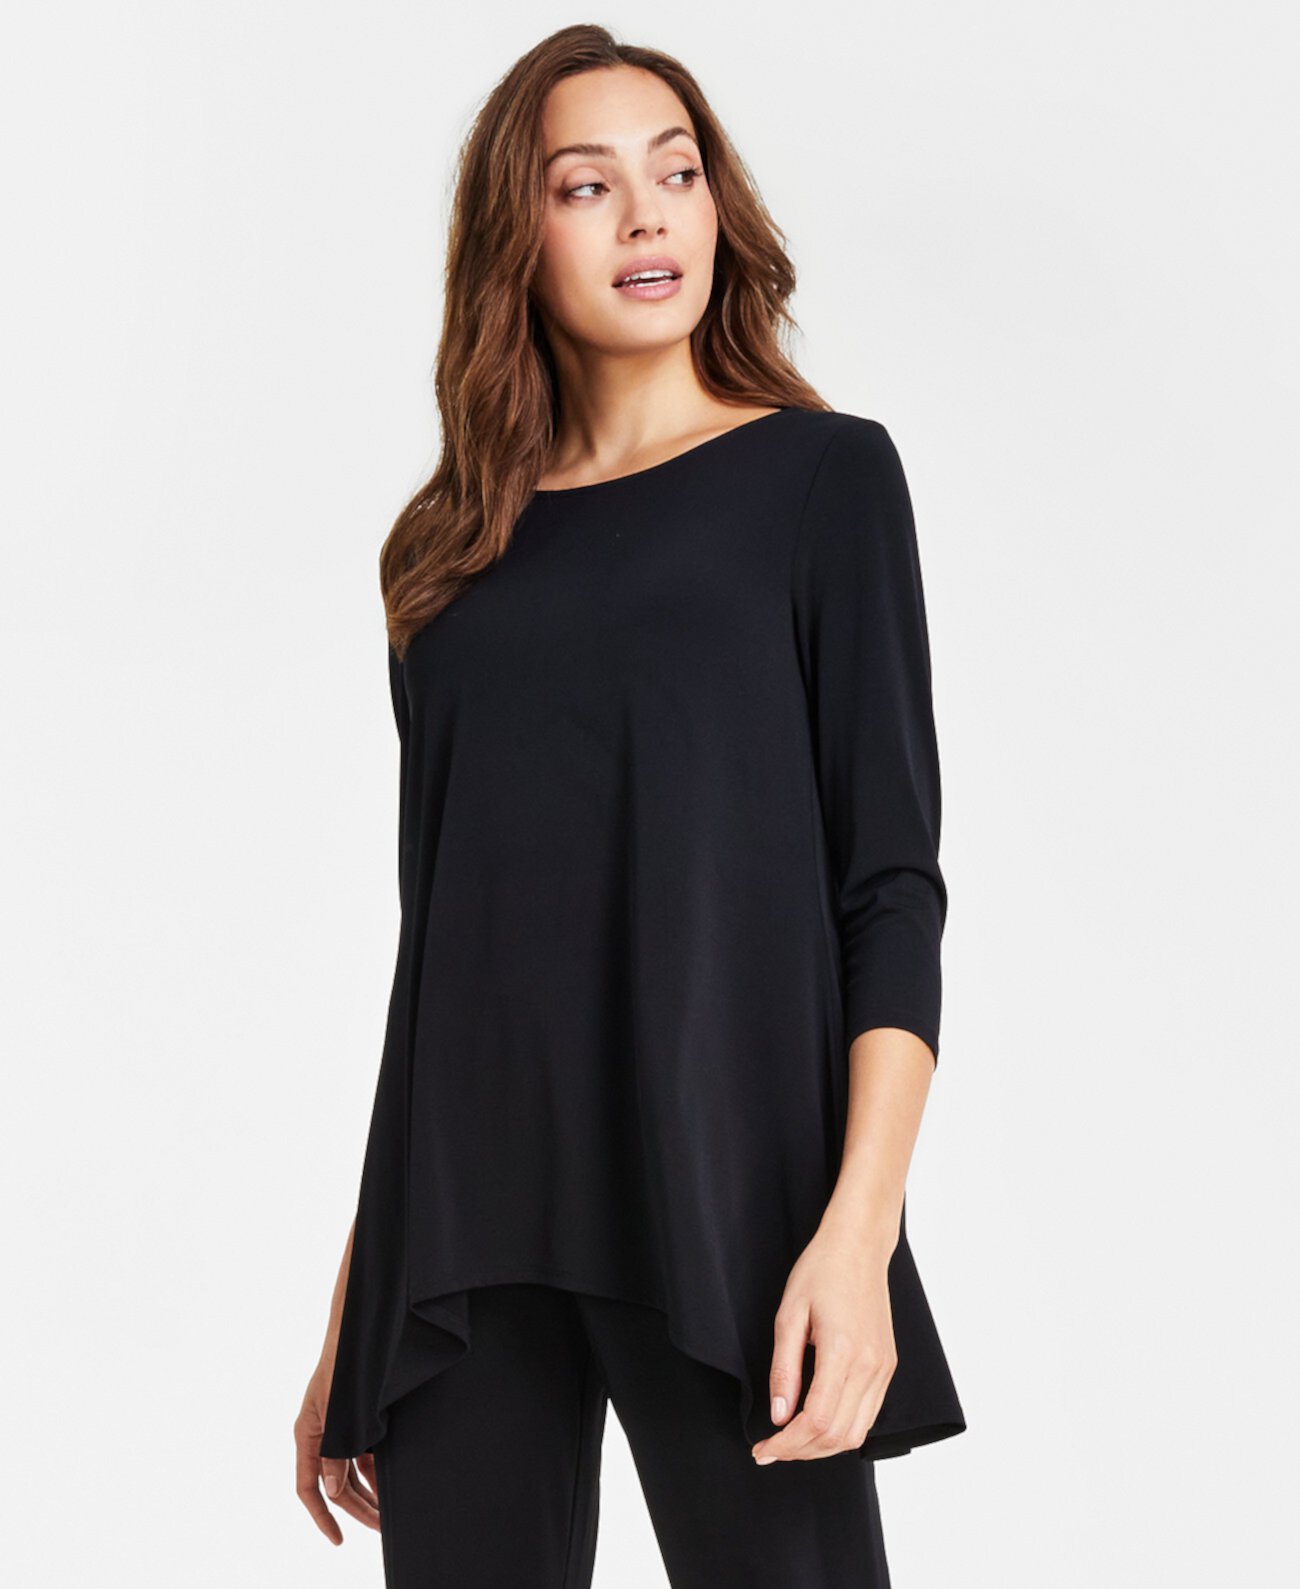 Women's 3/4-Sleeve Knit Top, Created for Macy's J&M Collection